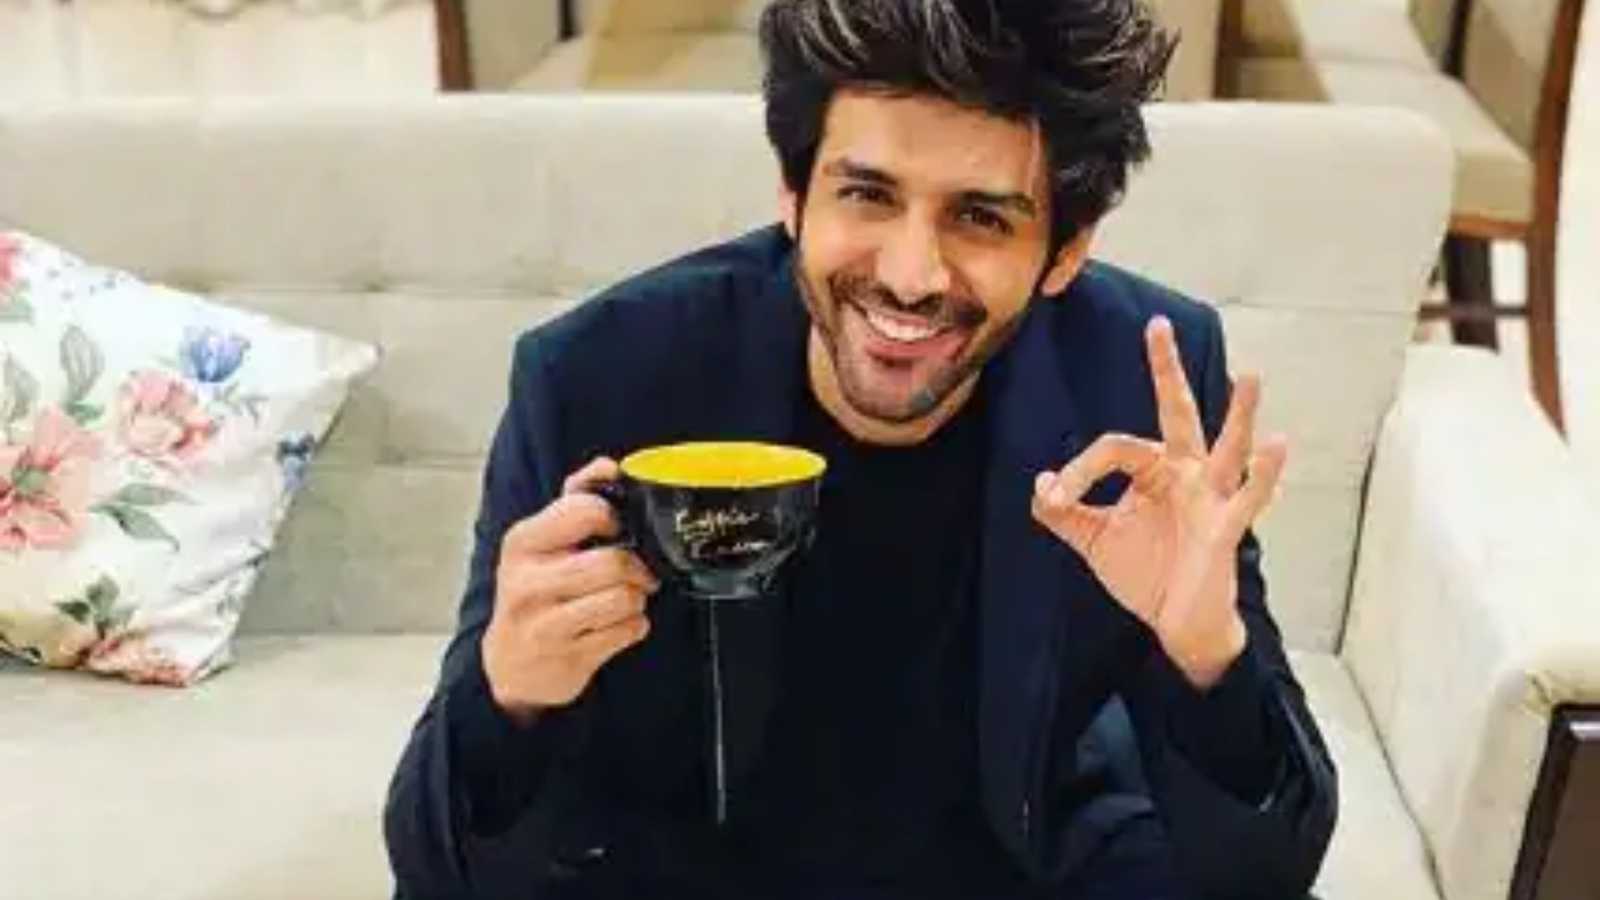 Did Kartik Aaryan take a sly dig at Koffee With Karan and ex Sara Ali Khan who called him 'everyone's ex' during the rapid fire round?